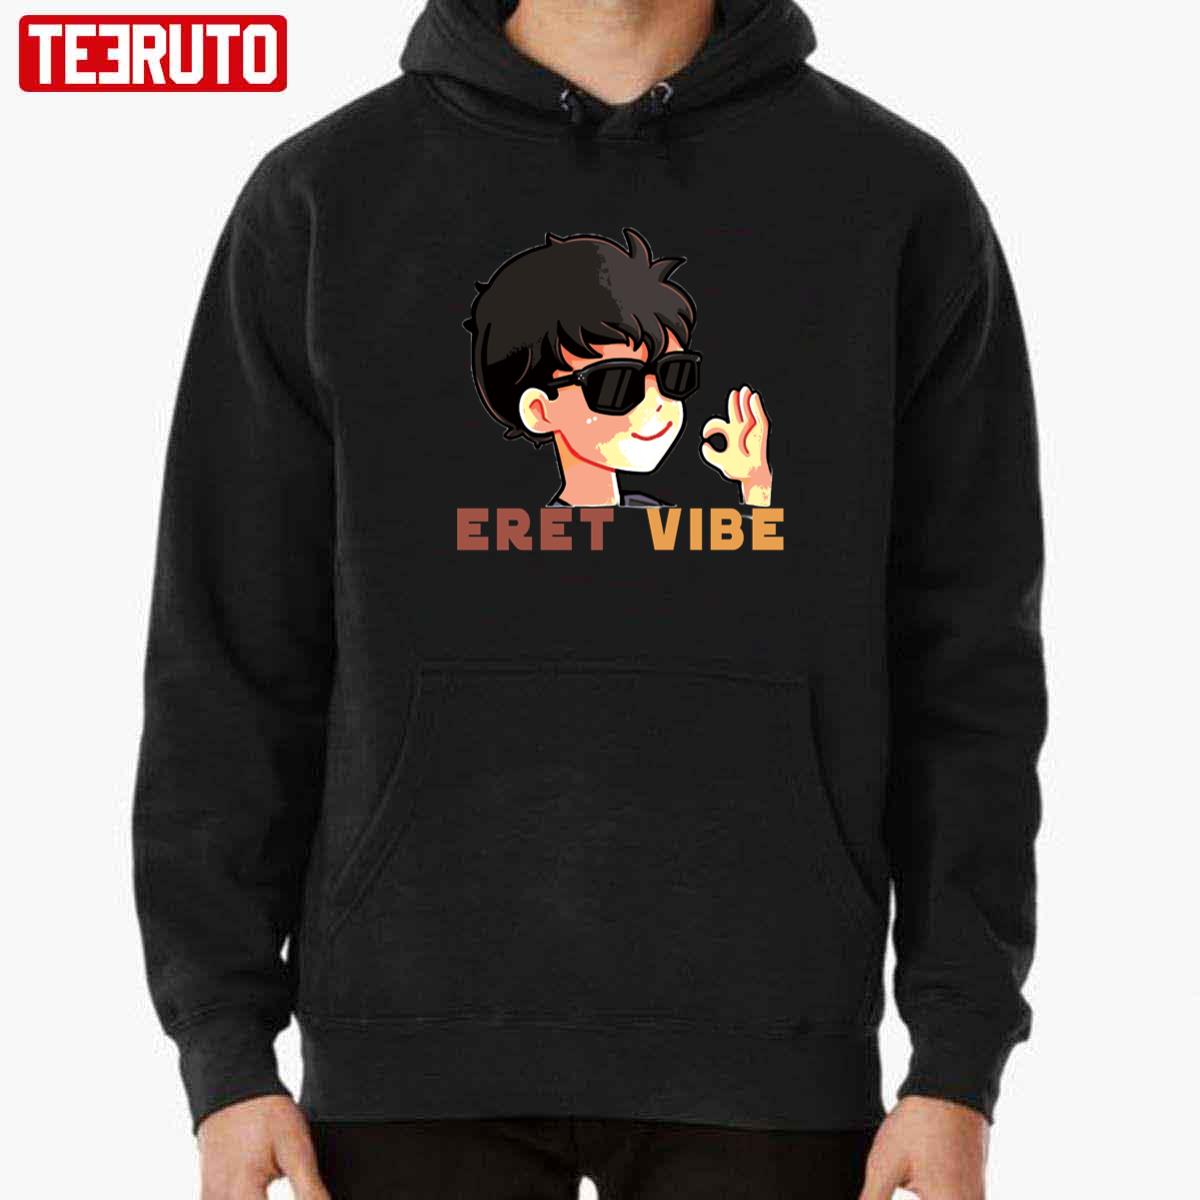 The Eret Positive Vibe Unisex Hoodie